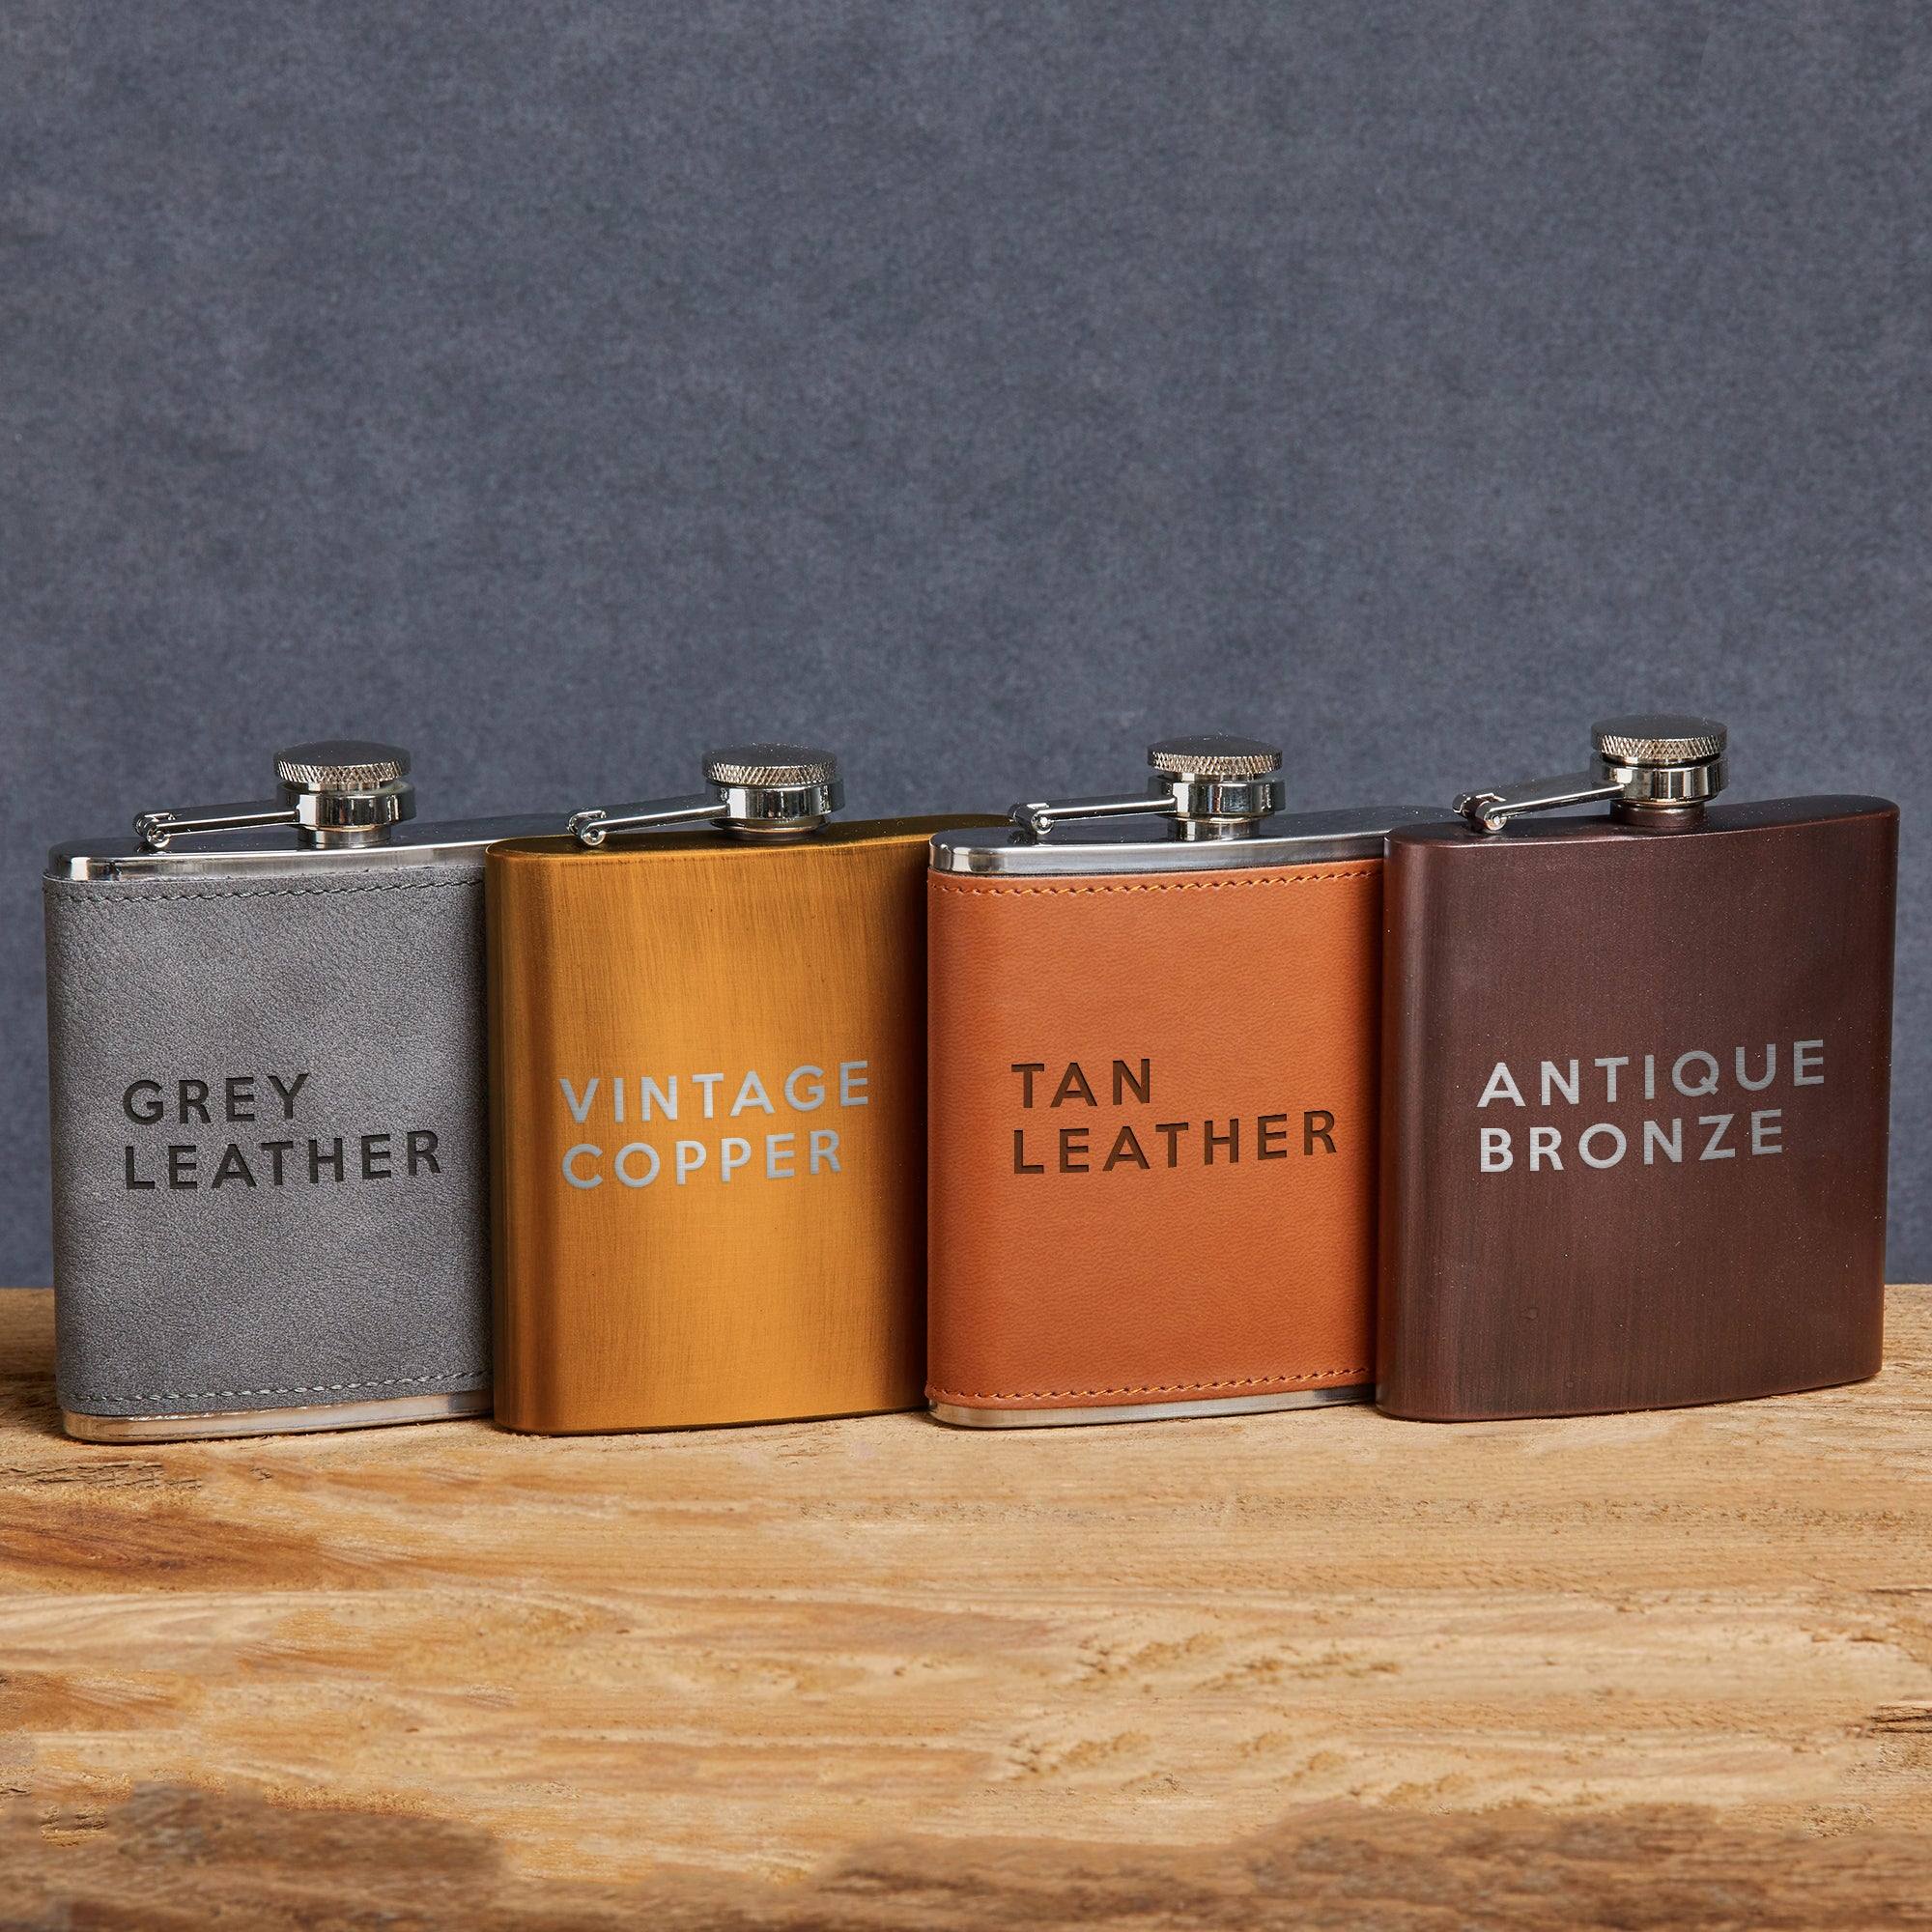 Engraved Hip Flask For Women - Dustandthings.com